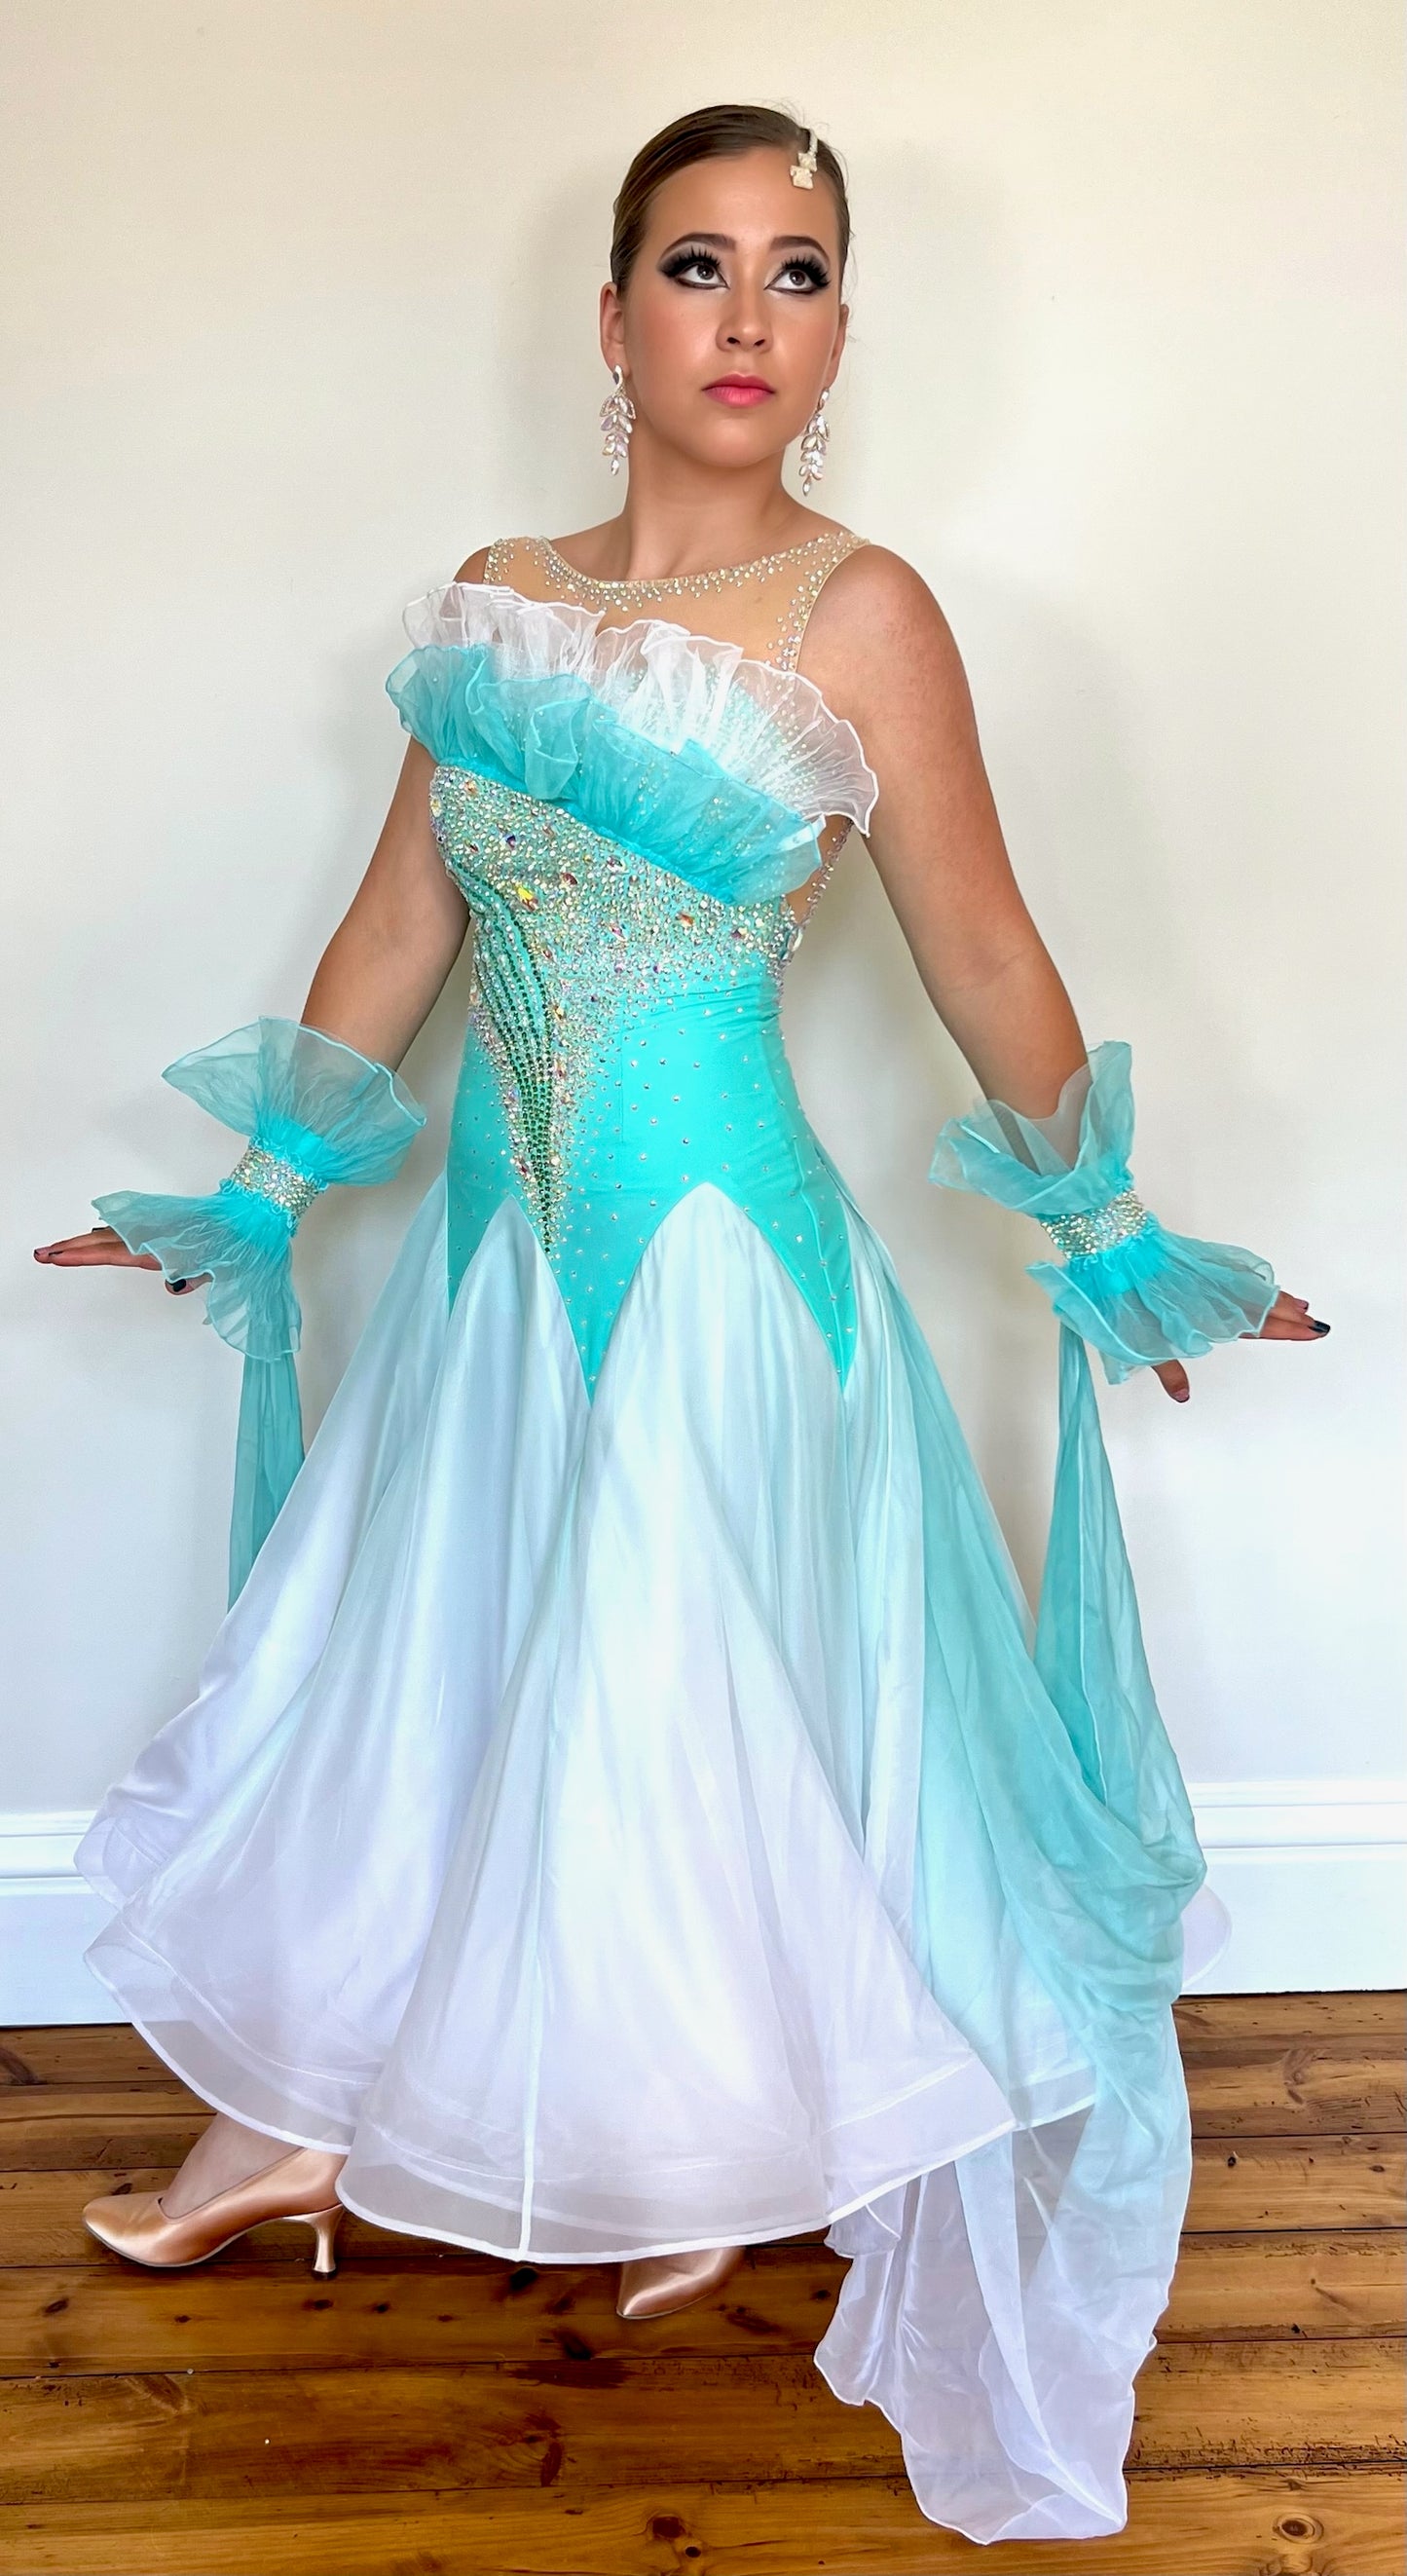 043 Bright Aqua & Green & White Ombré Ballroom Dress. Organza frill detailing to the upper chest. Decorative organza cuffs with ombré floats attached to the back on one side. Separate hanging float to the opposite side. Decorated in AB stones.